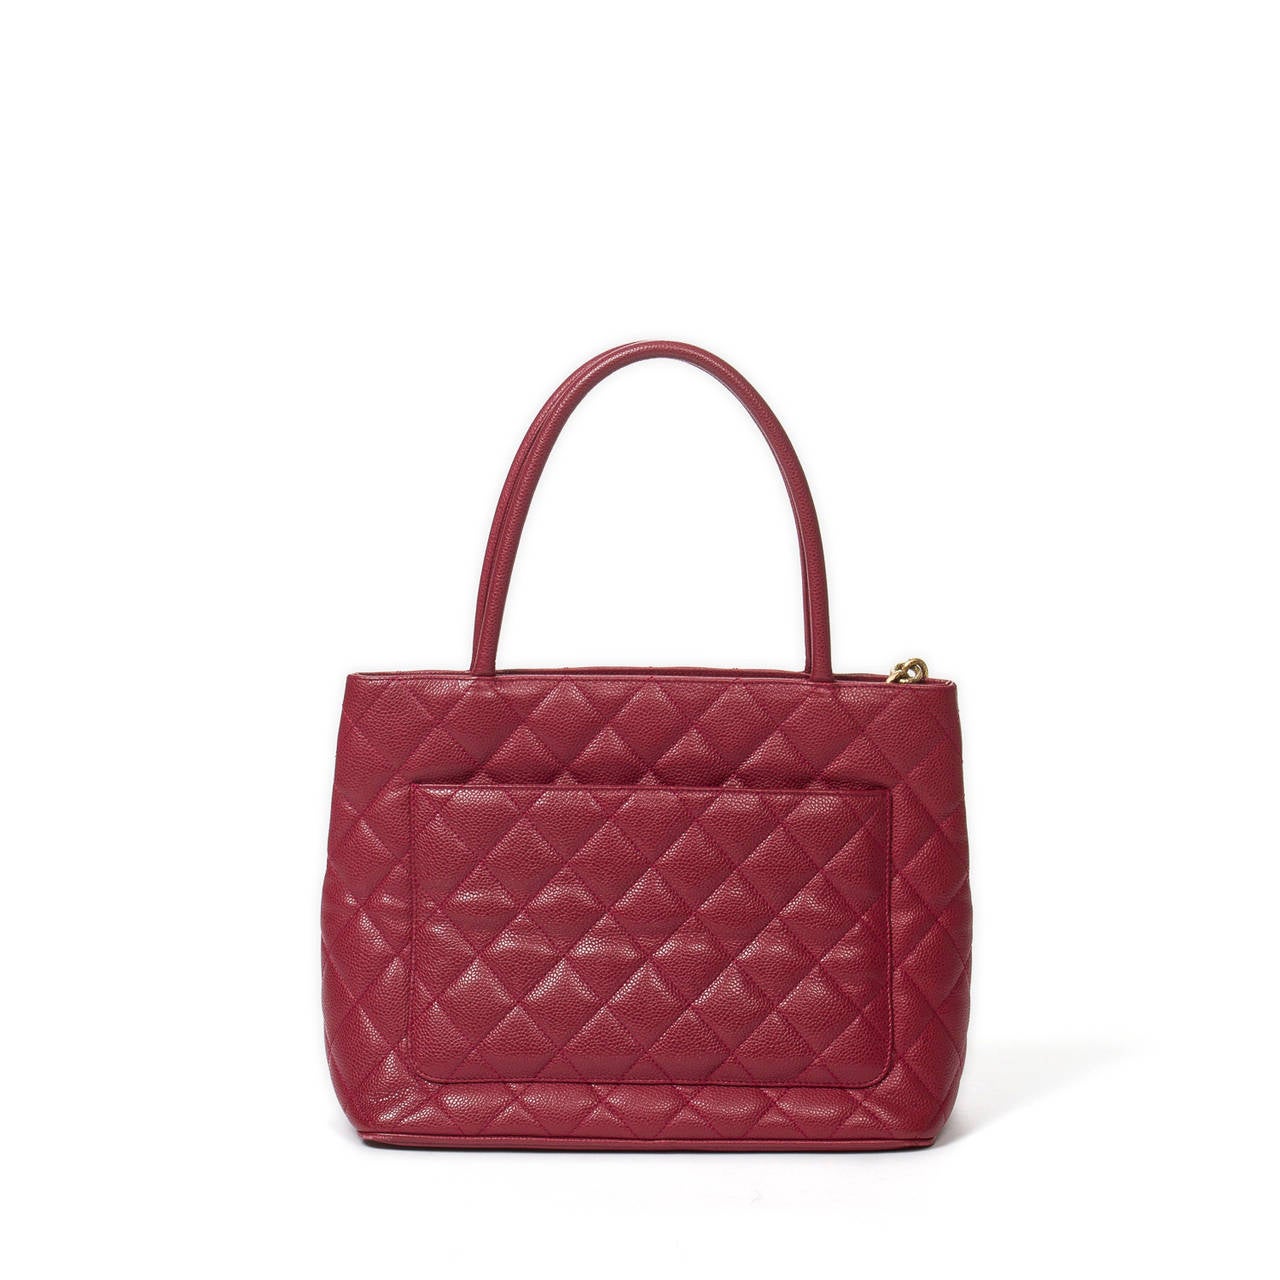 Chanel Médaillon Raspberry Grained Leather For Sale 1